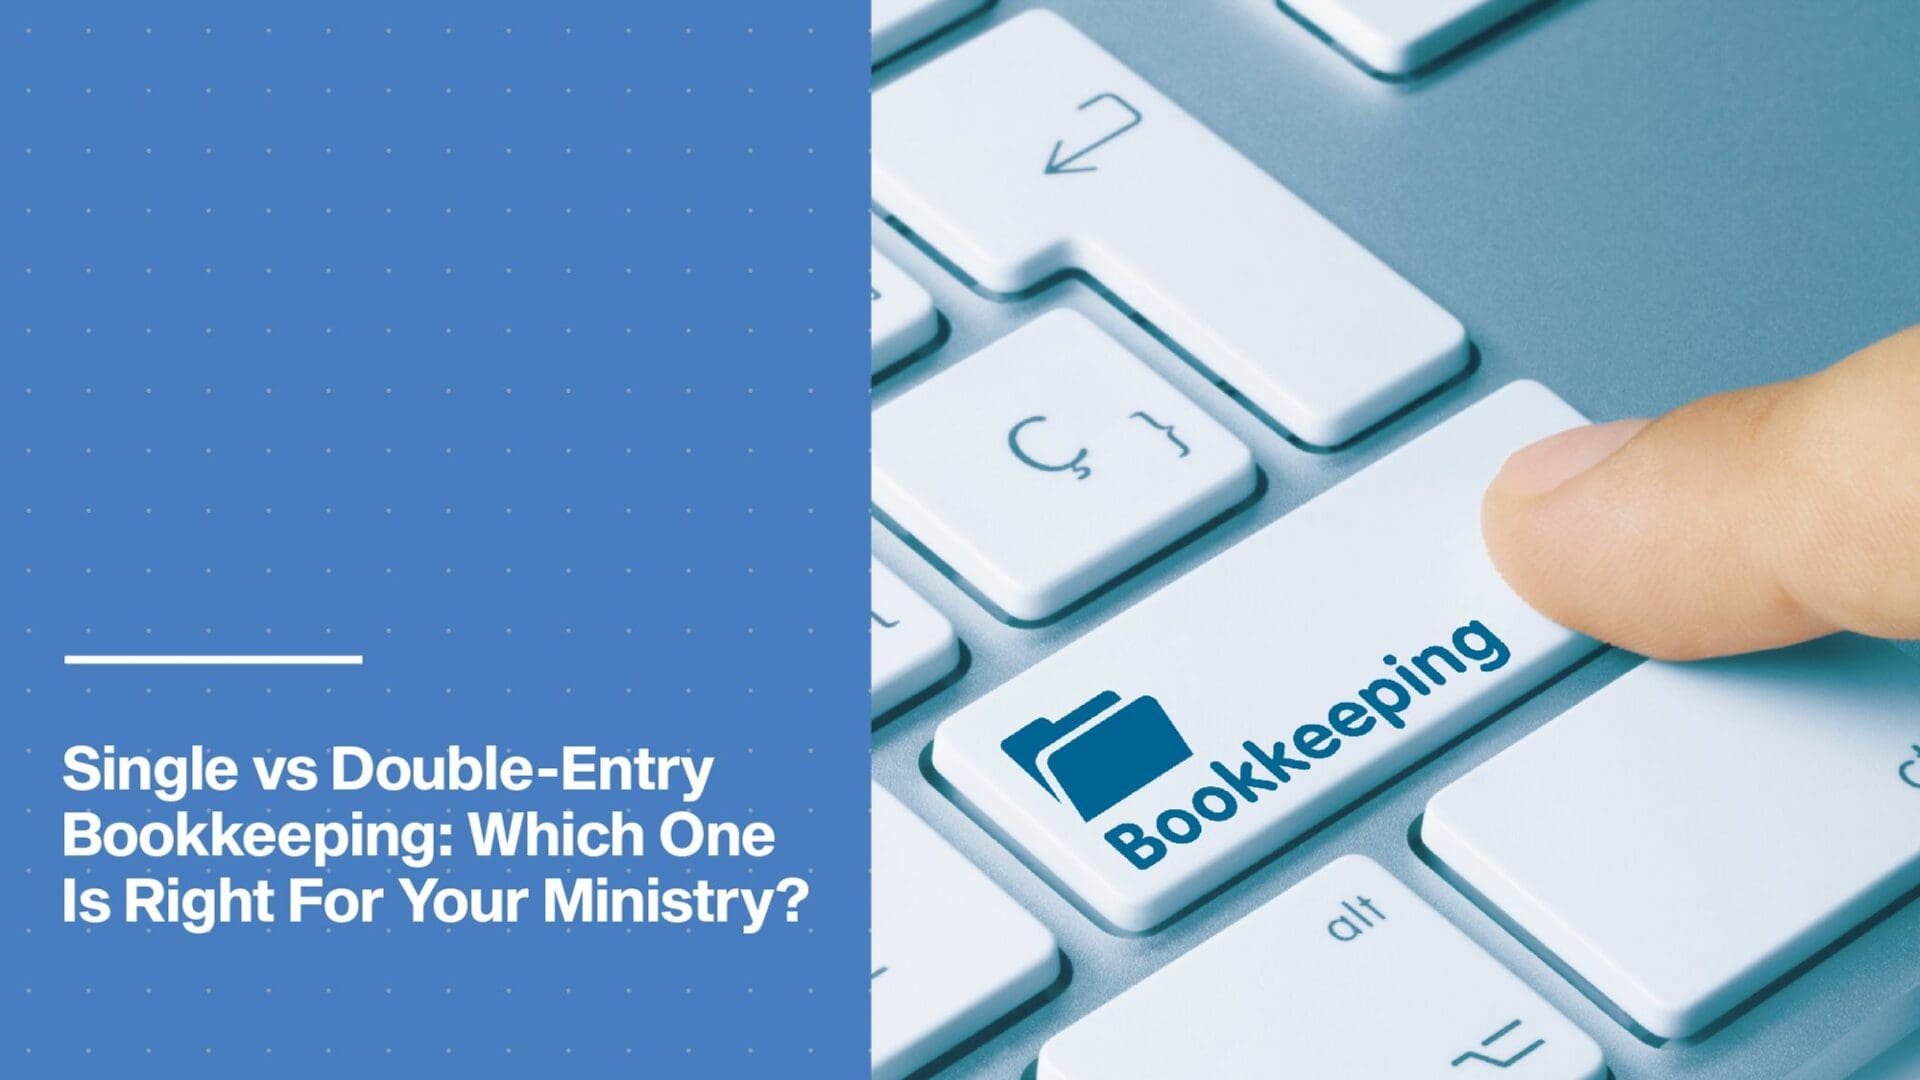 Single vs Double-Entry Bookkeeping: What's the Difference and What's better for a Church?